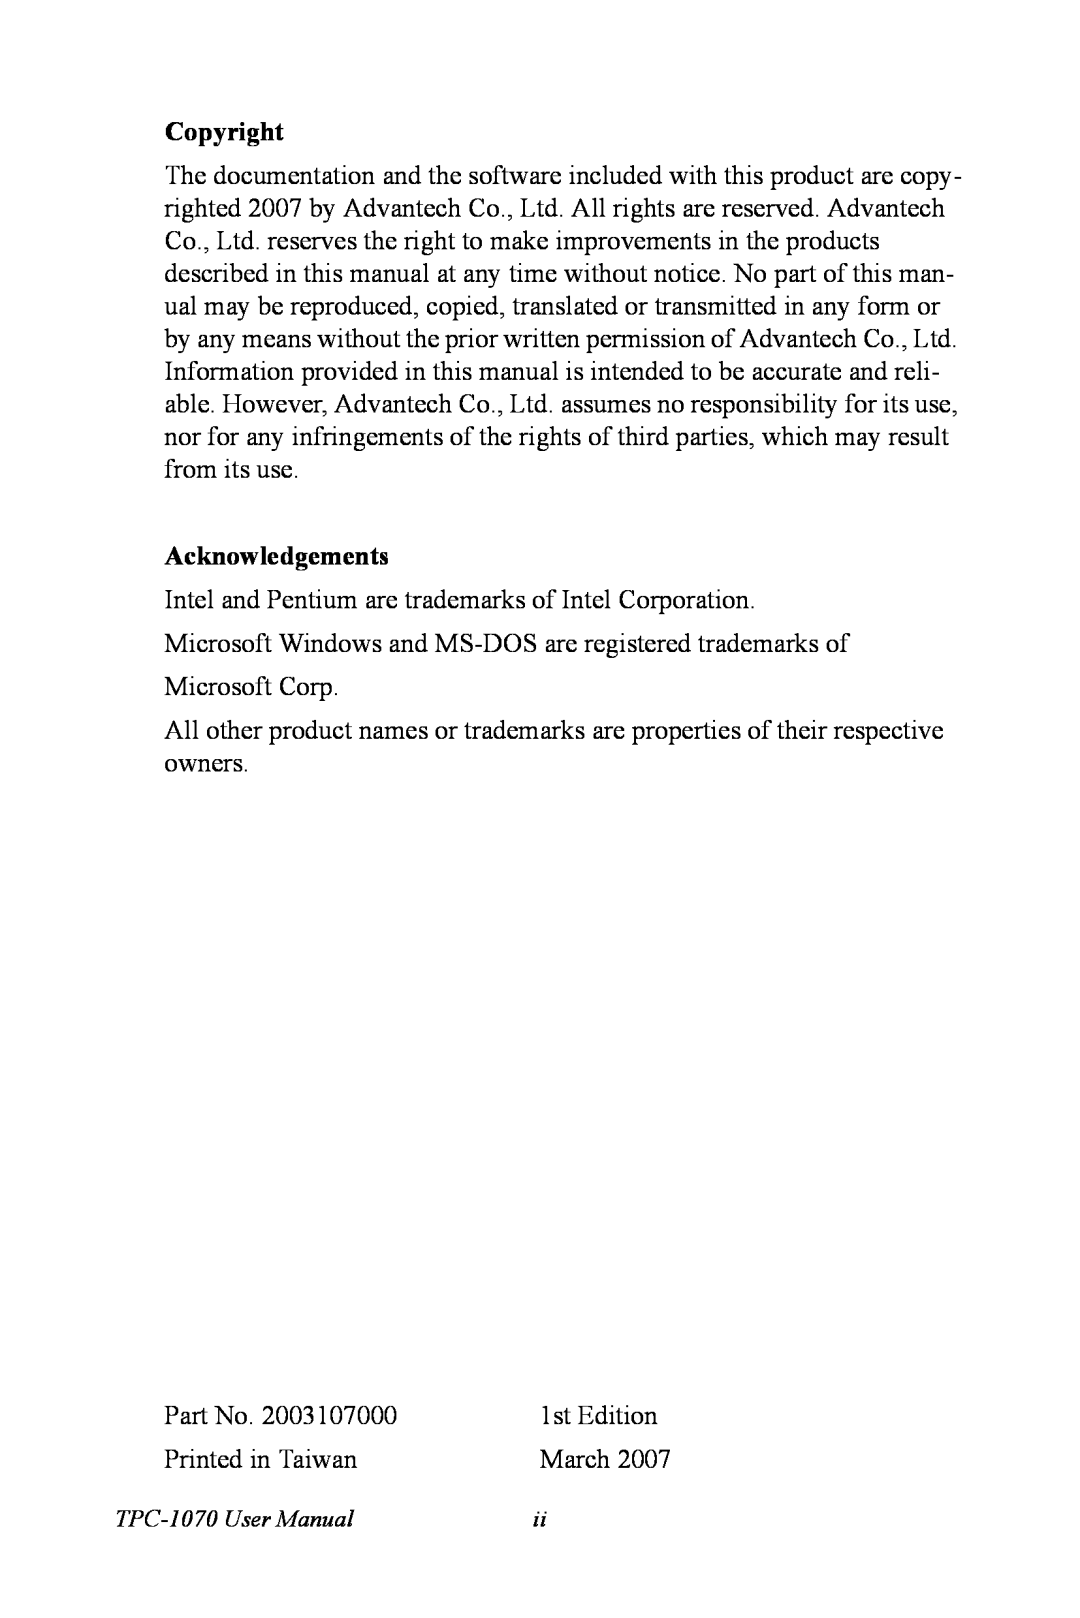 Intel user manual Copyright, Acknowledgements, 1st Edition, Printed in Taiwan, March, TPC-1070 User Manual 